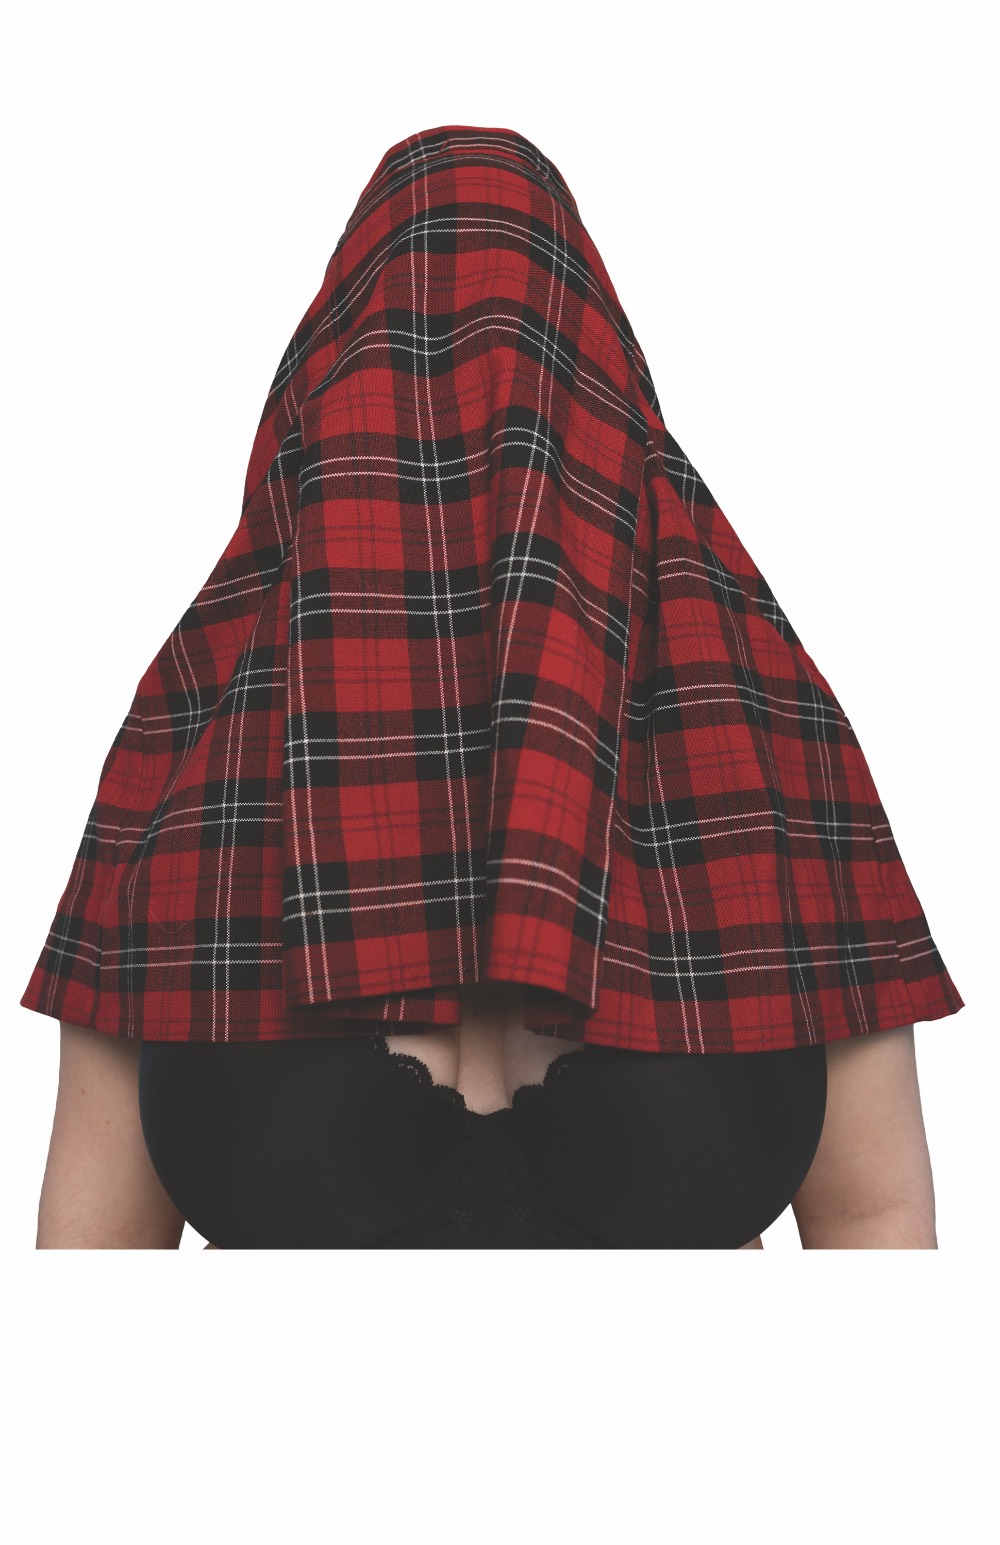 A bust shot of a woman whose head is covered with a tartan scarf